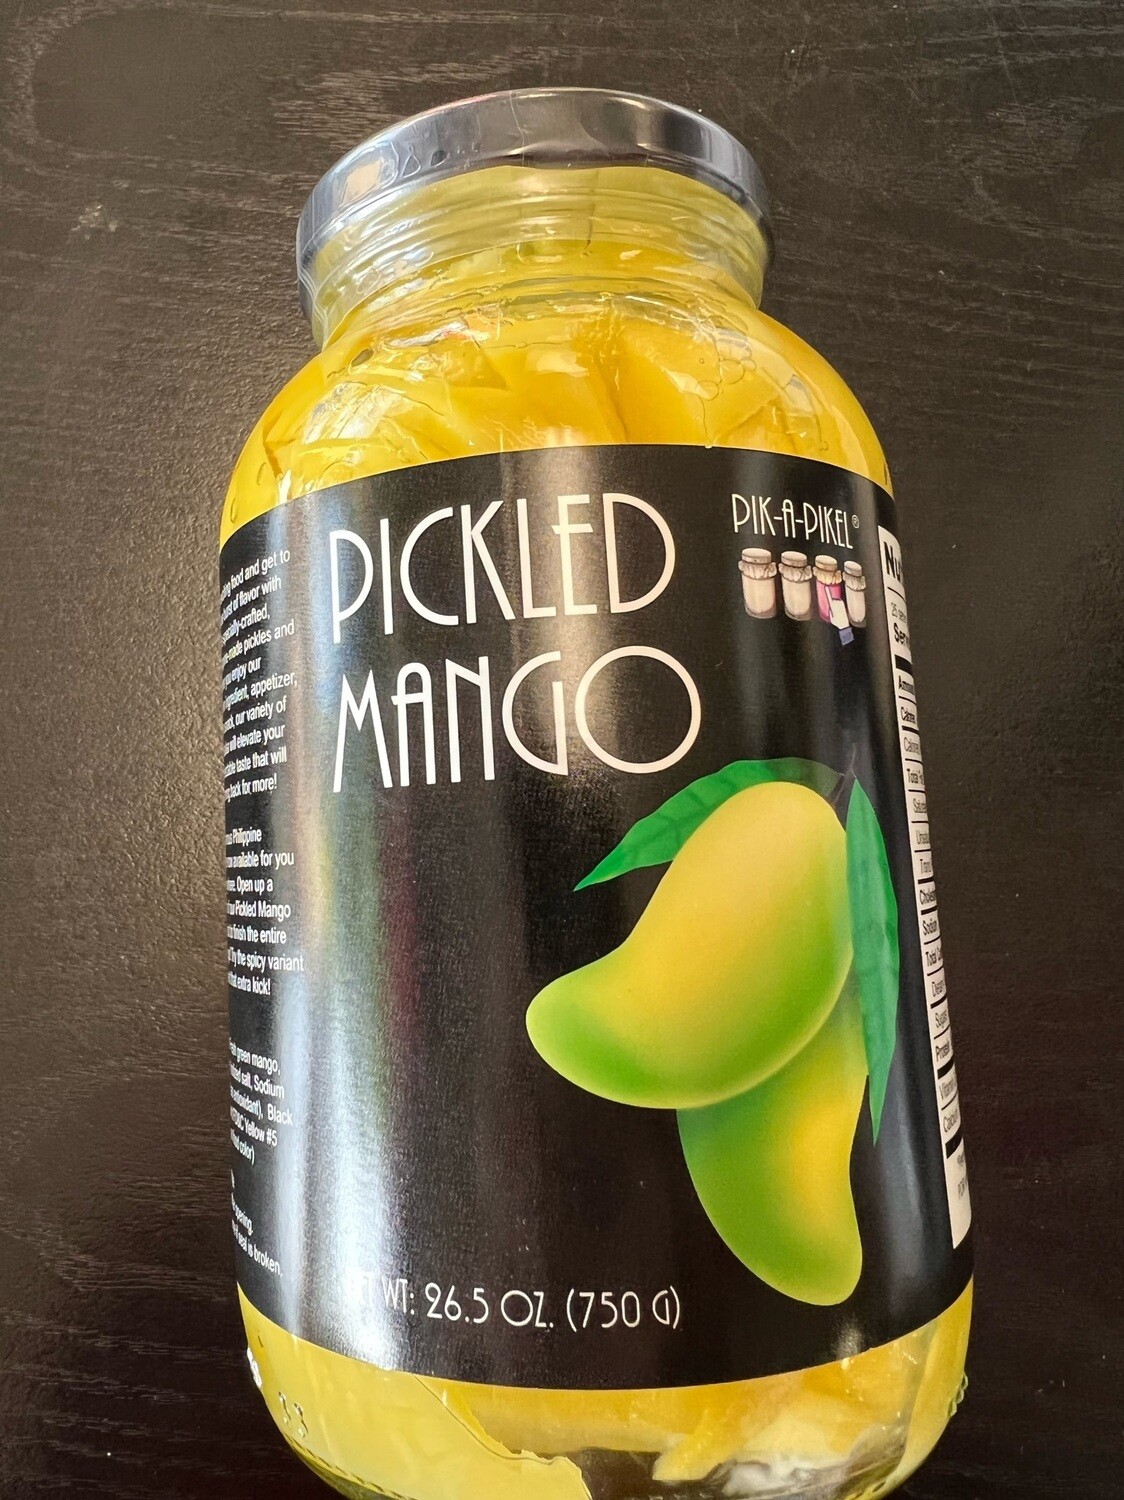 Pick-A-Pikel Pickled Mango